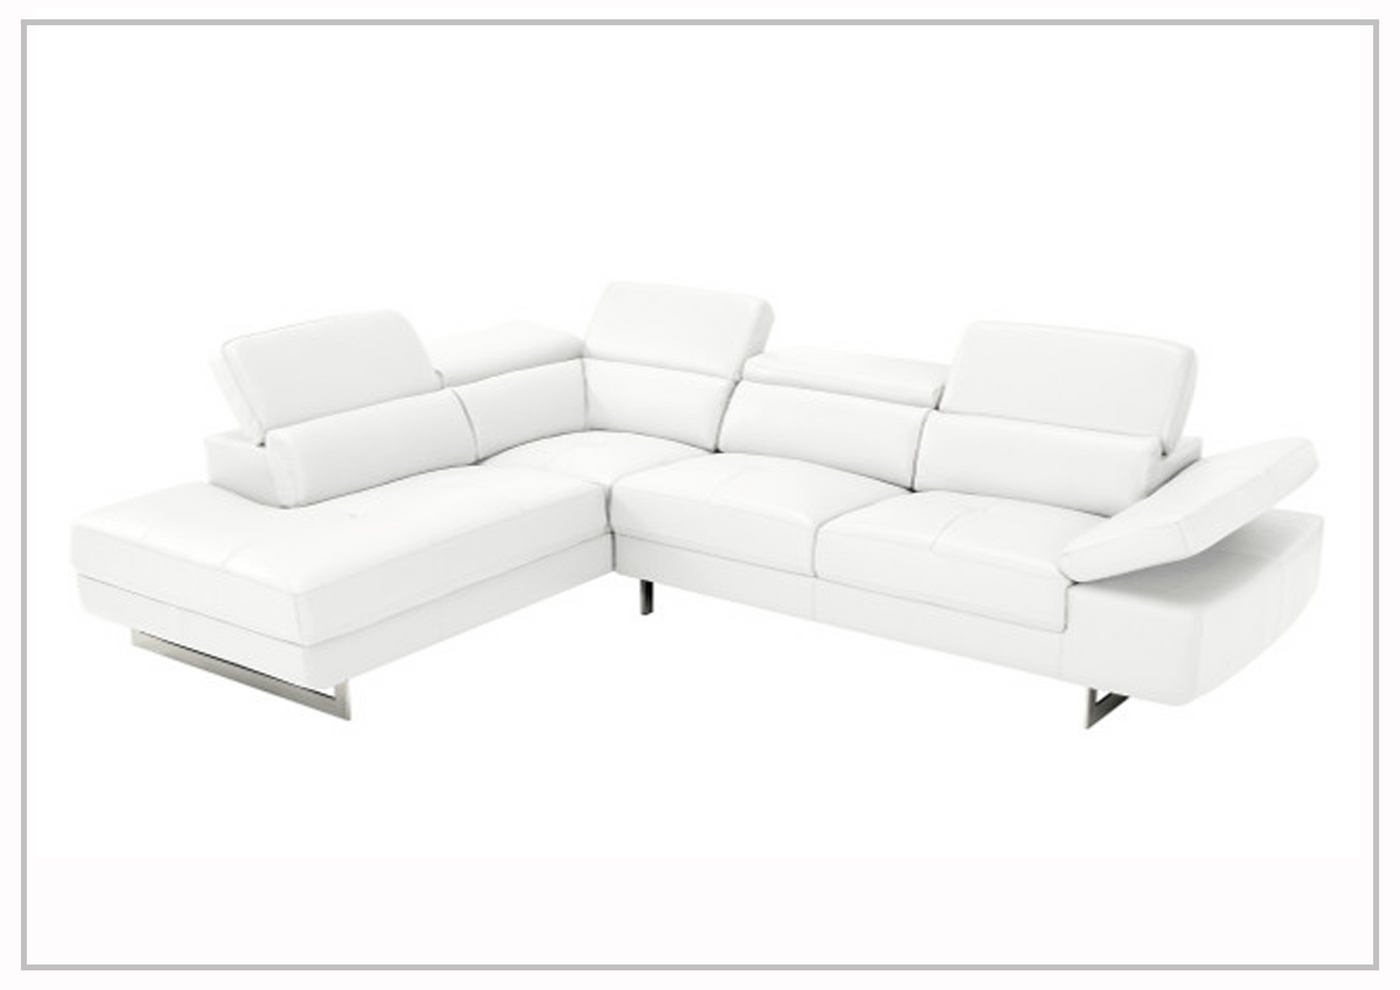 Barts Sectional Sofa with Motion Headrests